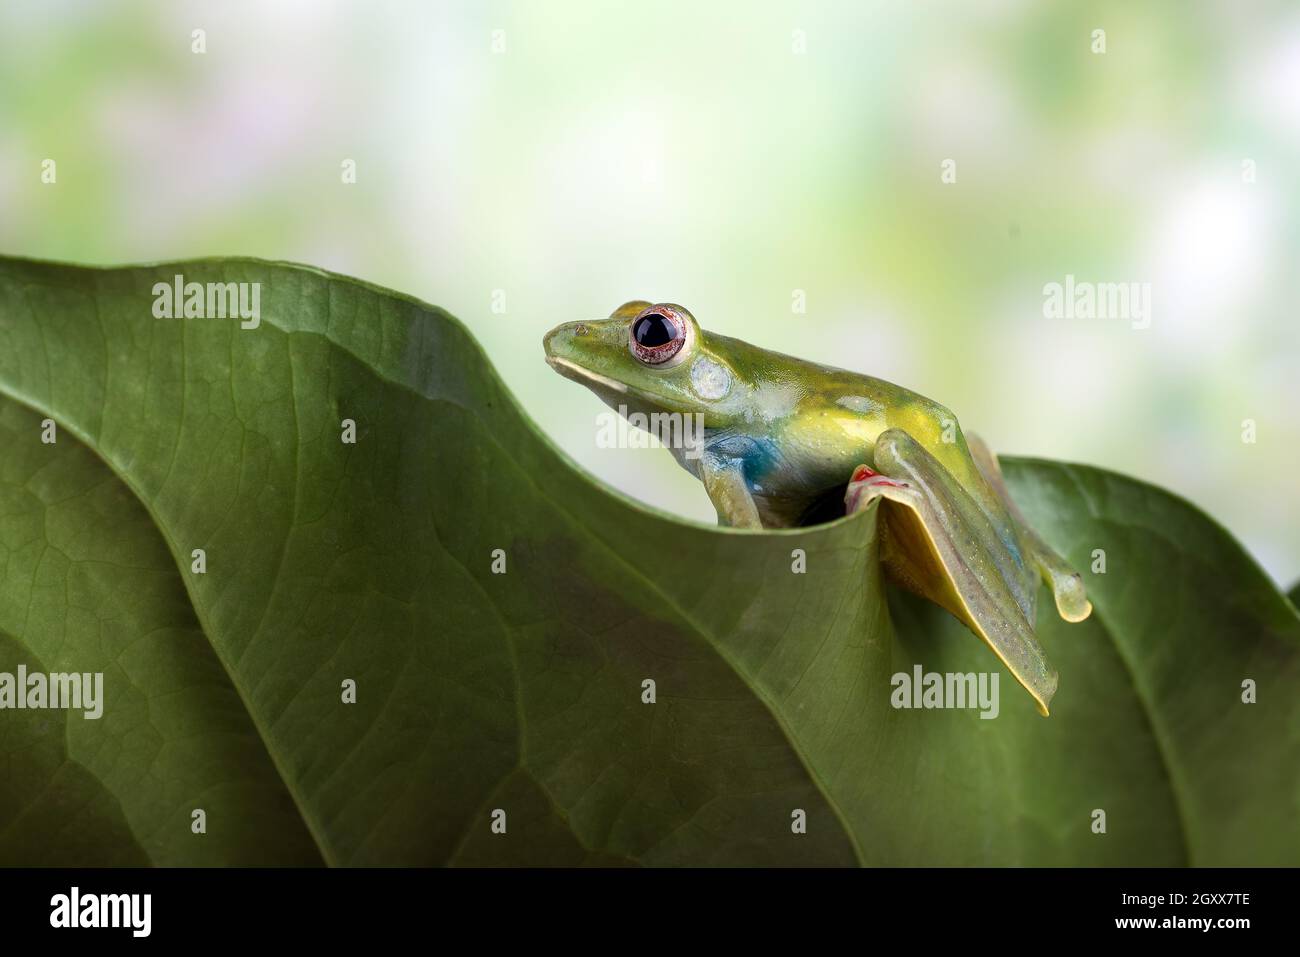 Malayan tree frog sitting on an Anthurium leaf, Indonesia Stock Photo